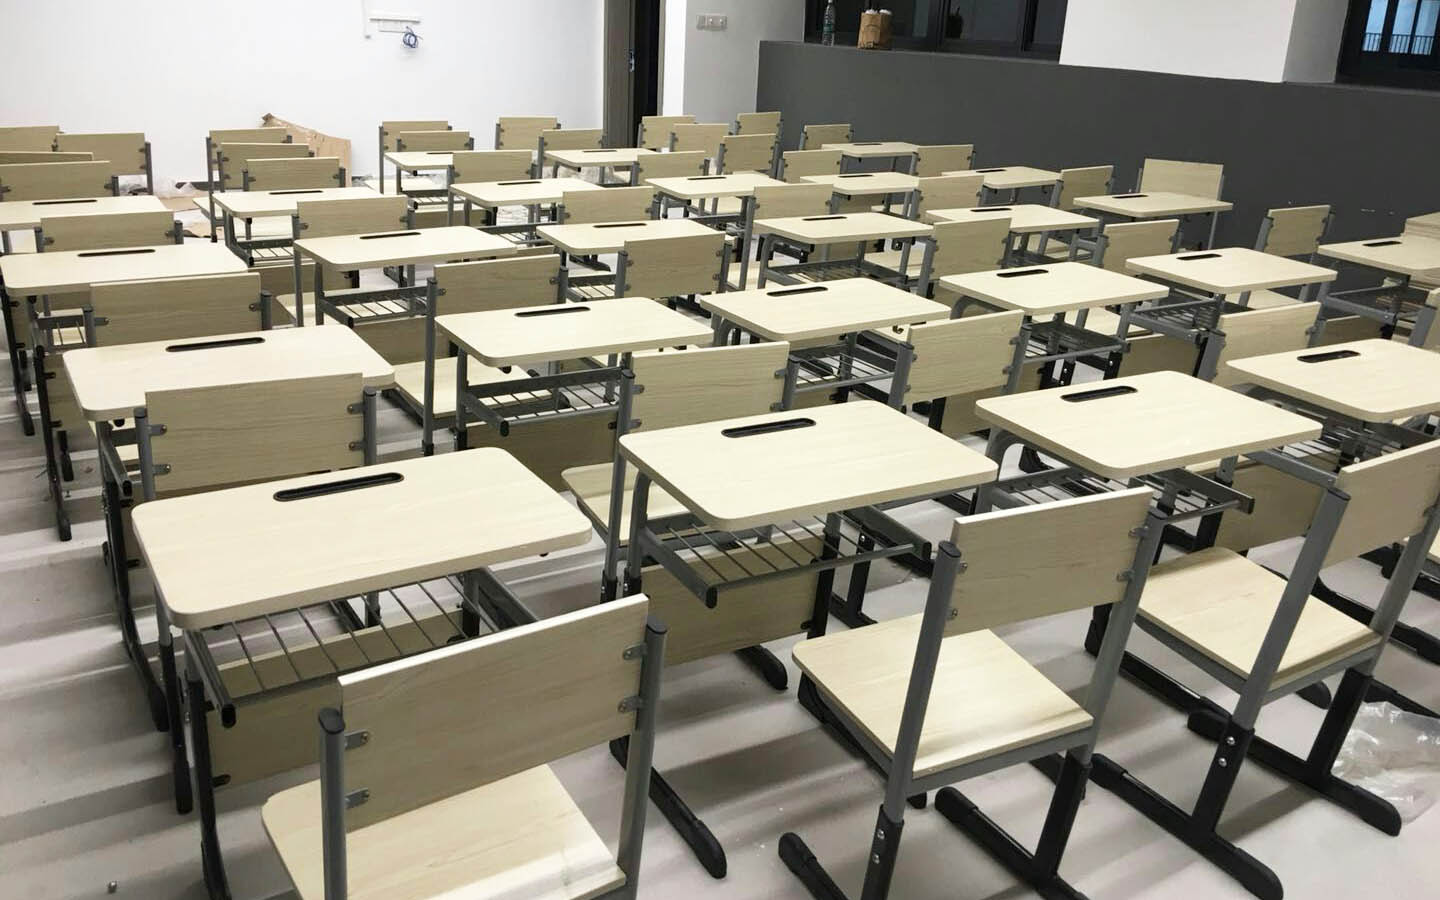 Dongxin furniture-Wooden School Table And Chair set manufacturer in Guangdong-14